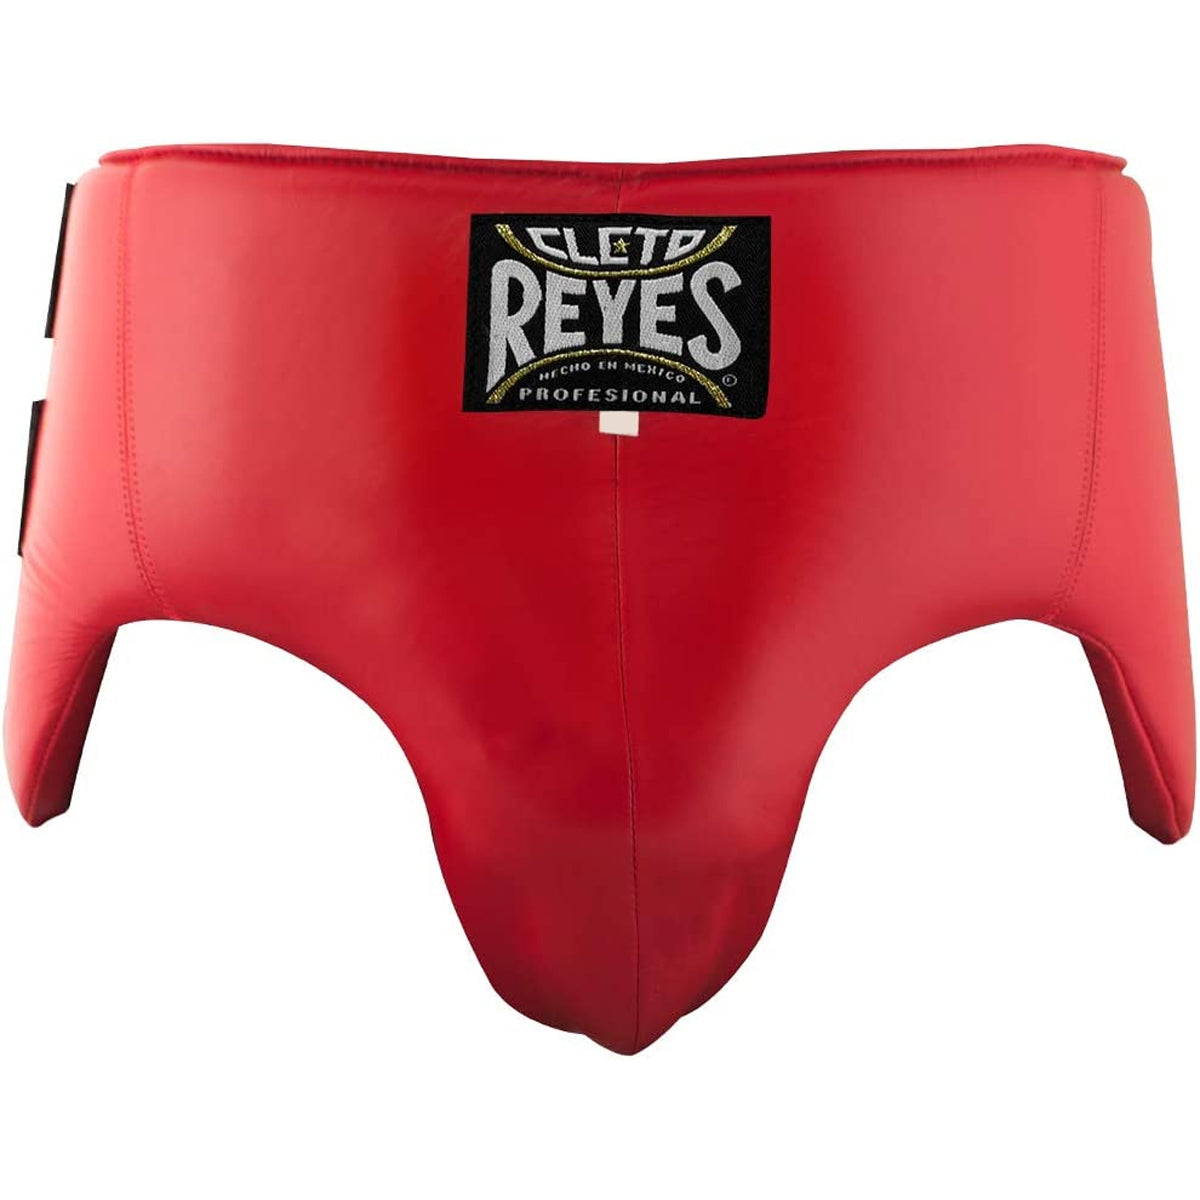 Cleto Reyes Kidney and Foul Padded Protective Cup - Small (26 - 30") - Red Cleto Reyes